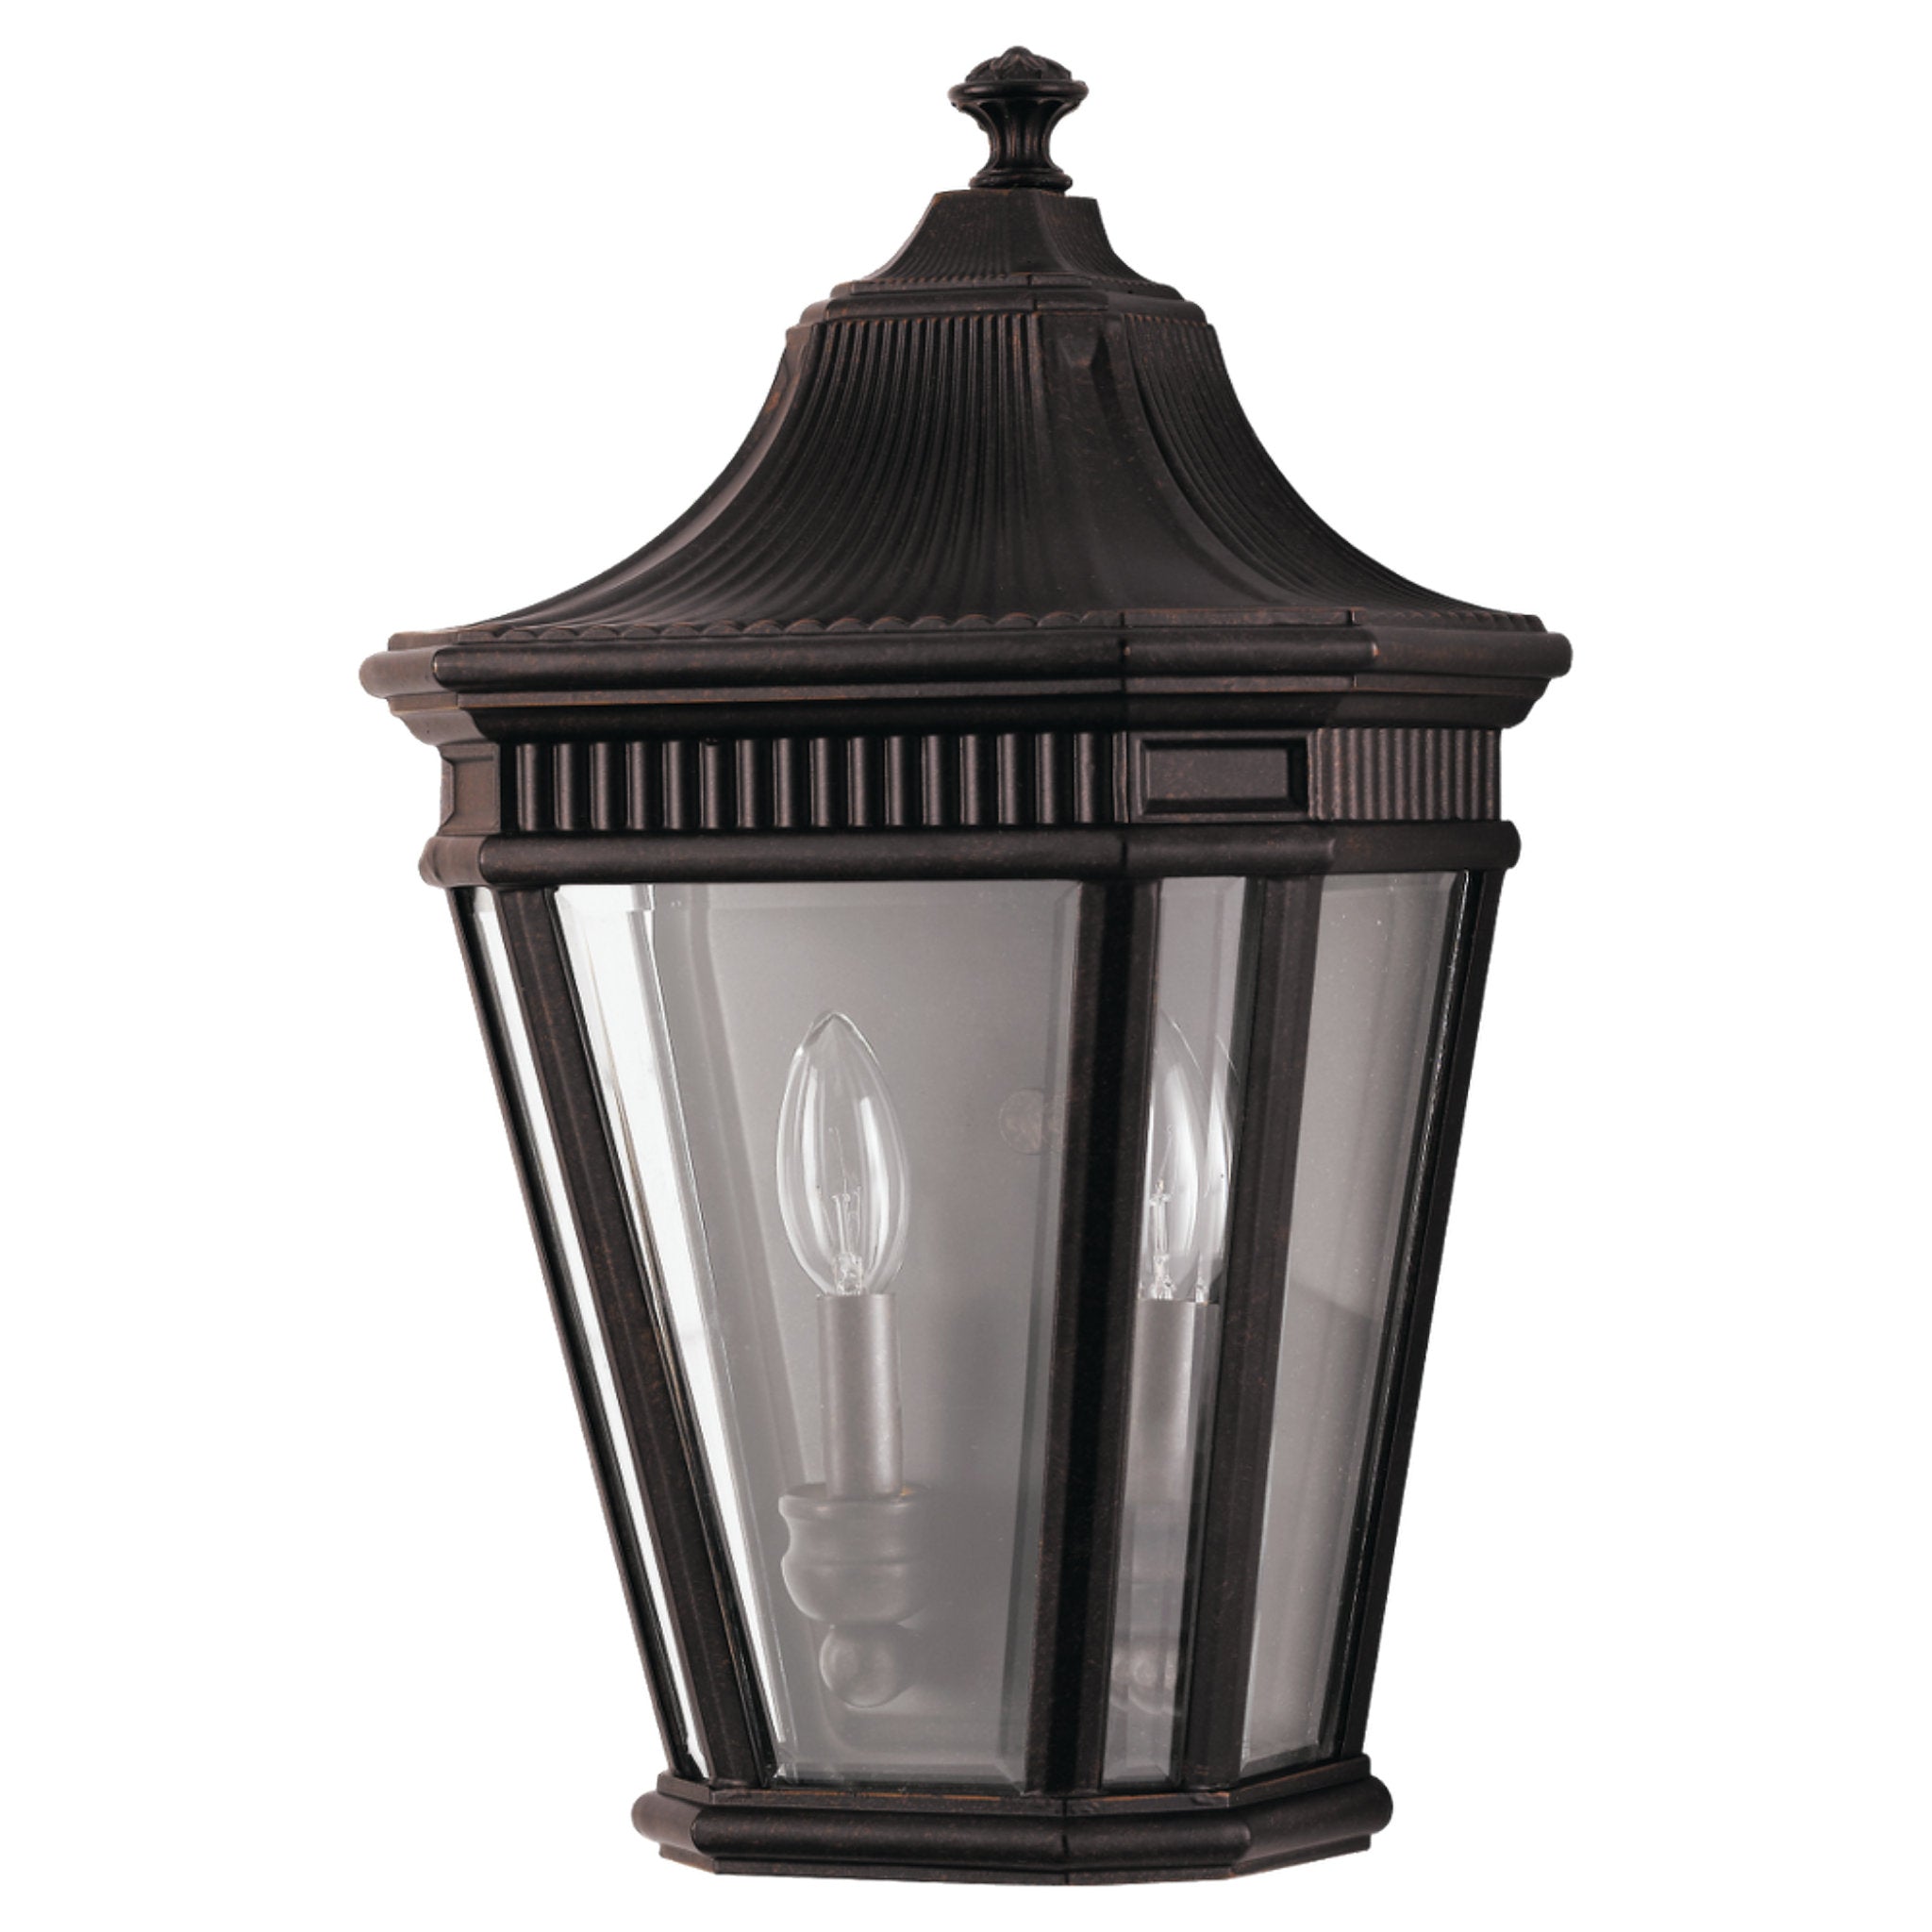 Cotswold Lane Pocket Lantern Traditional Outdoor Fixture 9.5" Width 16" Height Aluminum Irregular Clear Beveled Shade in Grecian Bronze